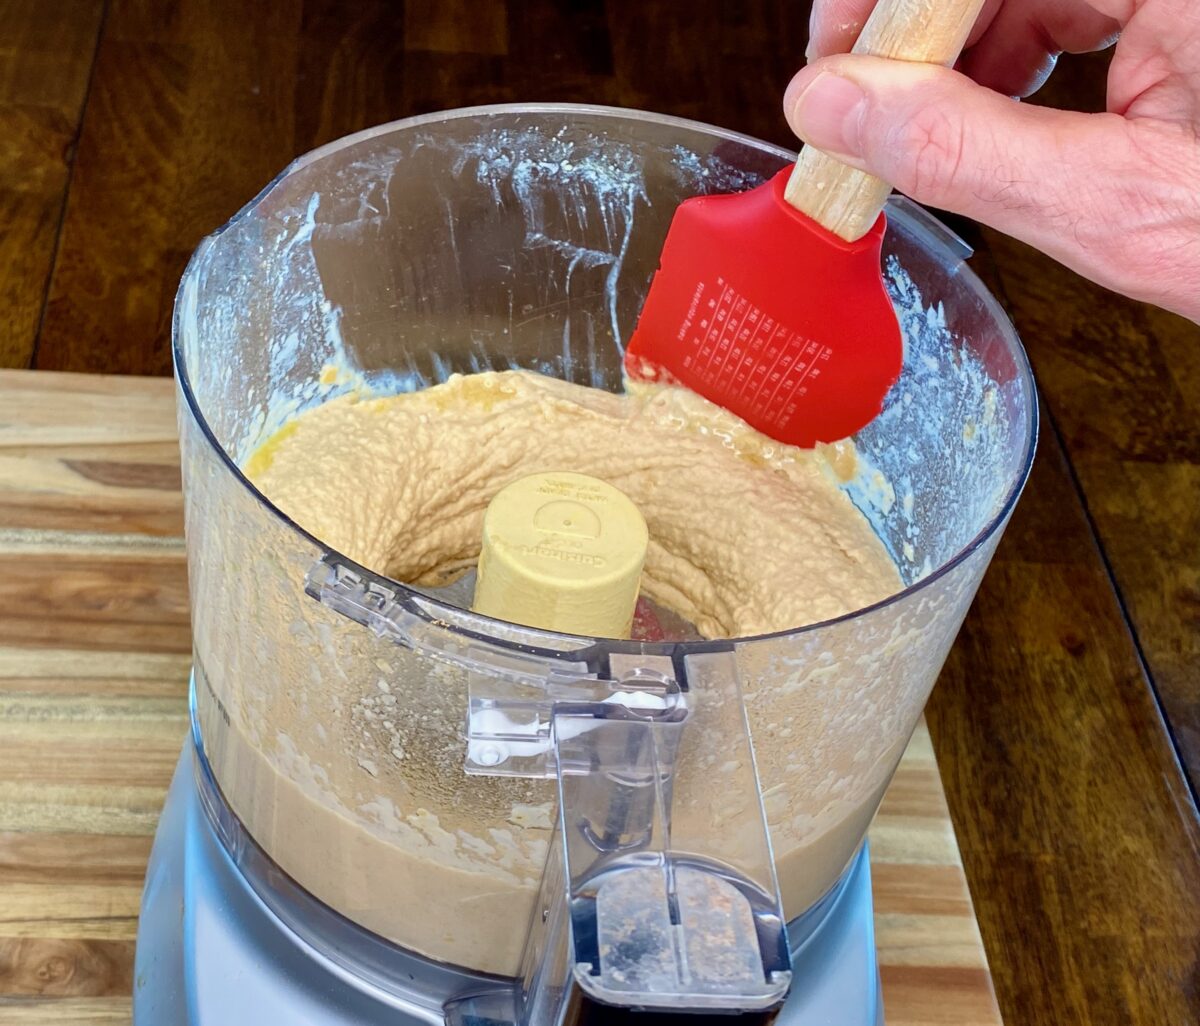 Scraping down the sides of the food processor after the hummus has processed for 1 minute.